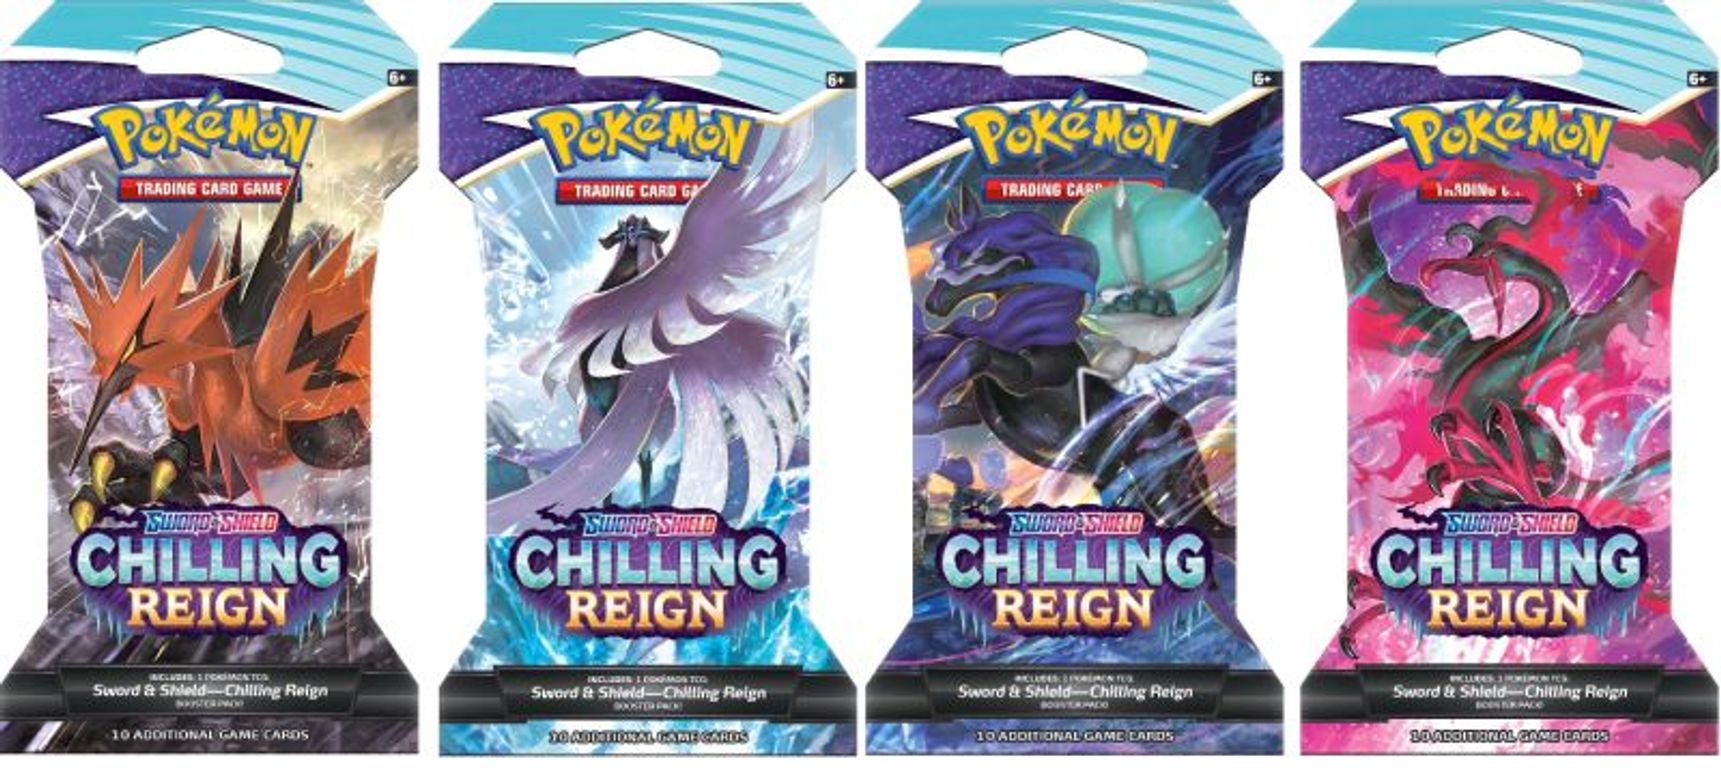 Pokémon TCG: Sword & Shield-Chilling Reign Sleeved Booster Pack caja